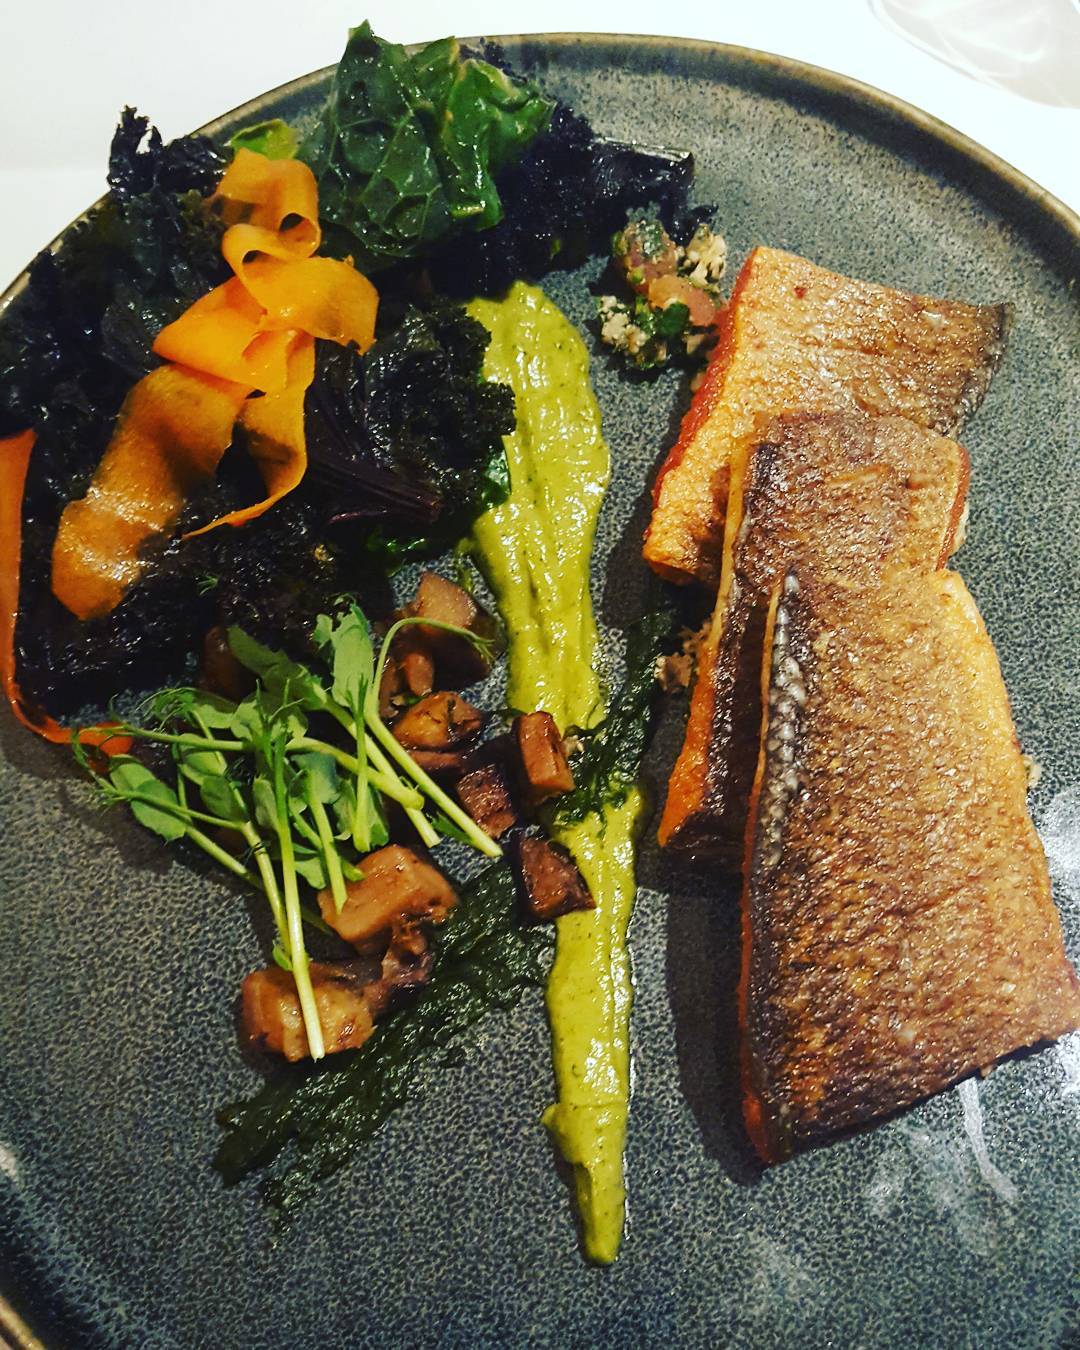 Fillet of Seabass with cavolo nero , cauliflower tabouleh, and aubergine caponata and mixed vegetables.

Healthy good fats in the seabass with crispy skin -yum! 
A smear of aubergine puree and cauilflower couscous and crispy cavolo nero.
The carrot is sliced and cooked together with cabbage and kale. Mixed together with some Moroccan style spices.

vegetables